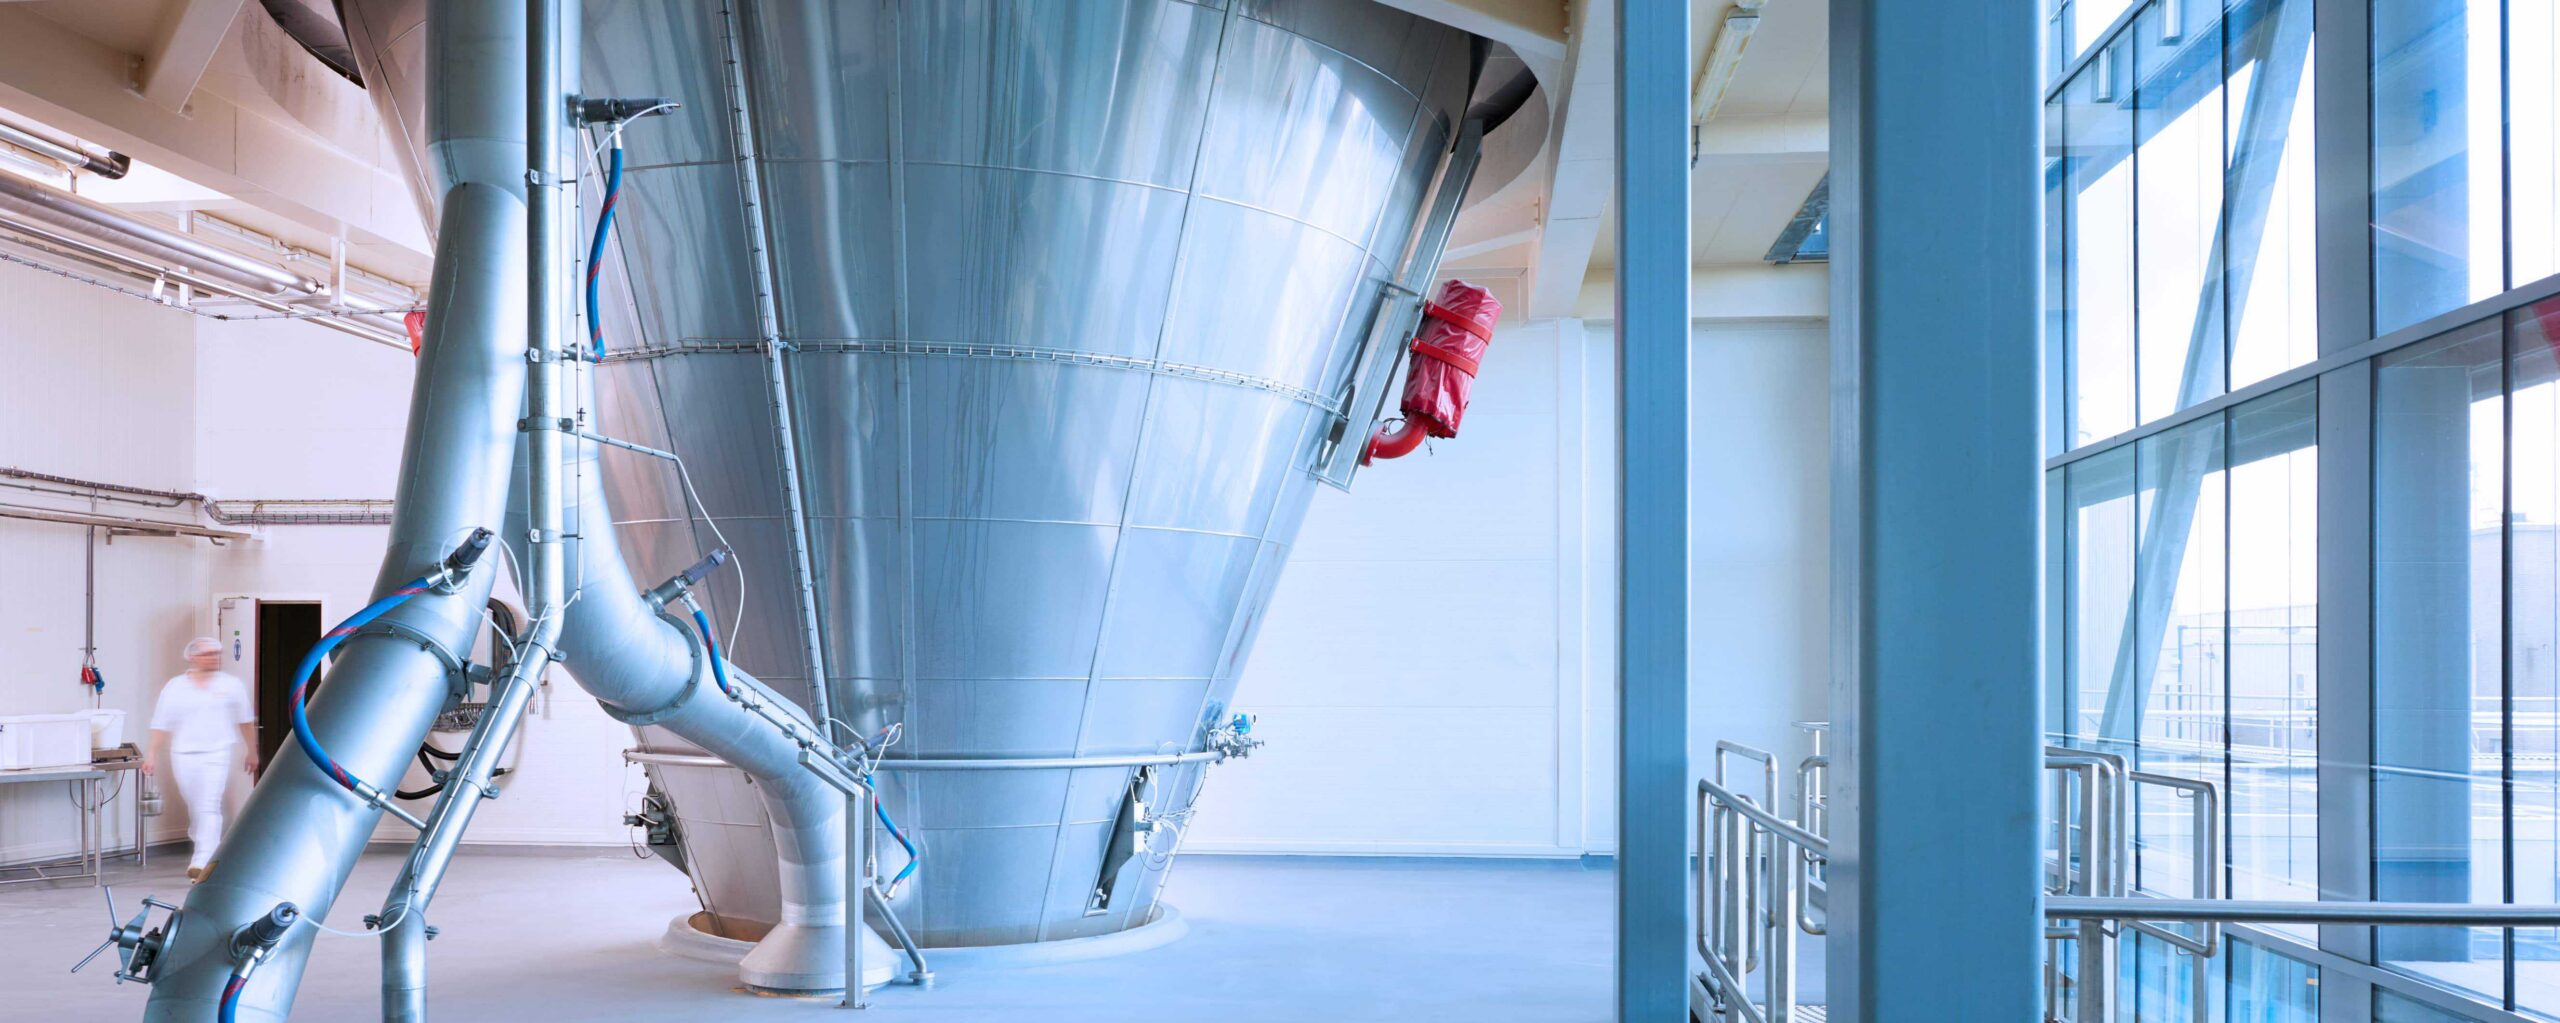 Enhancing Nutritional Delivery: Innovations in Milk Powder Processing Equipment